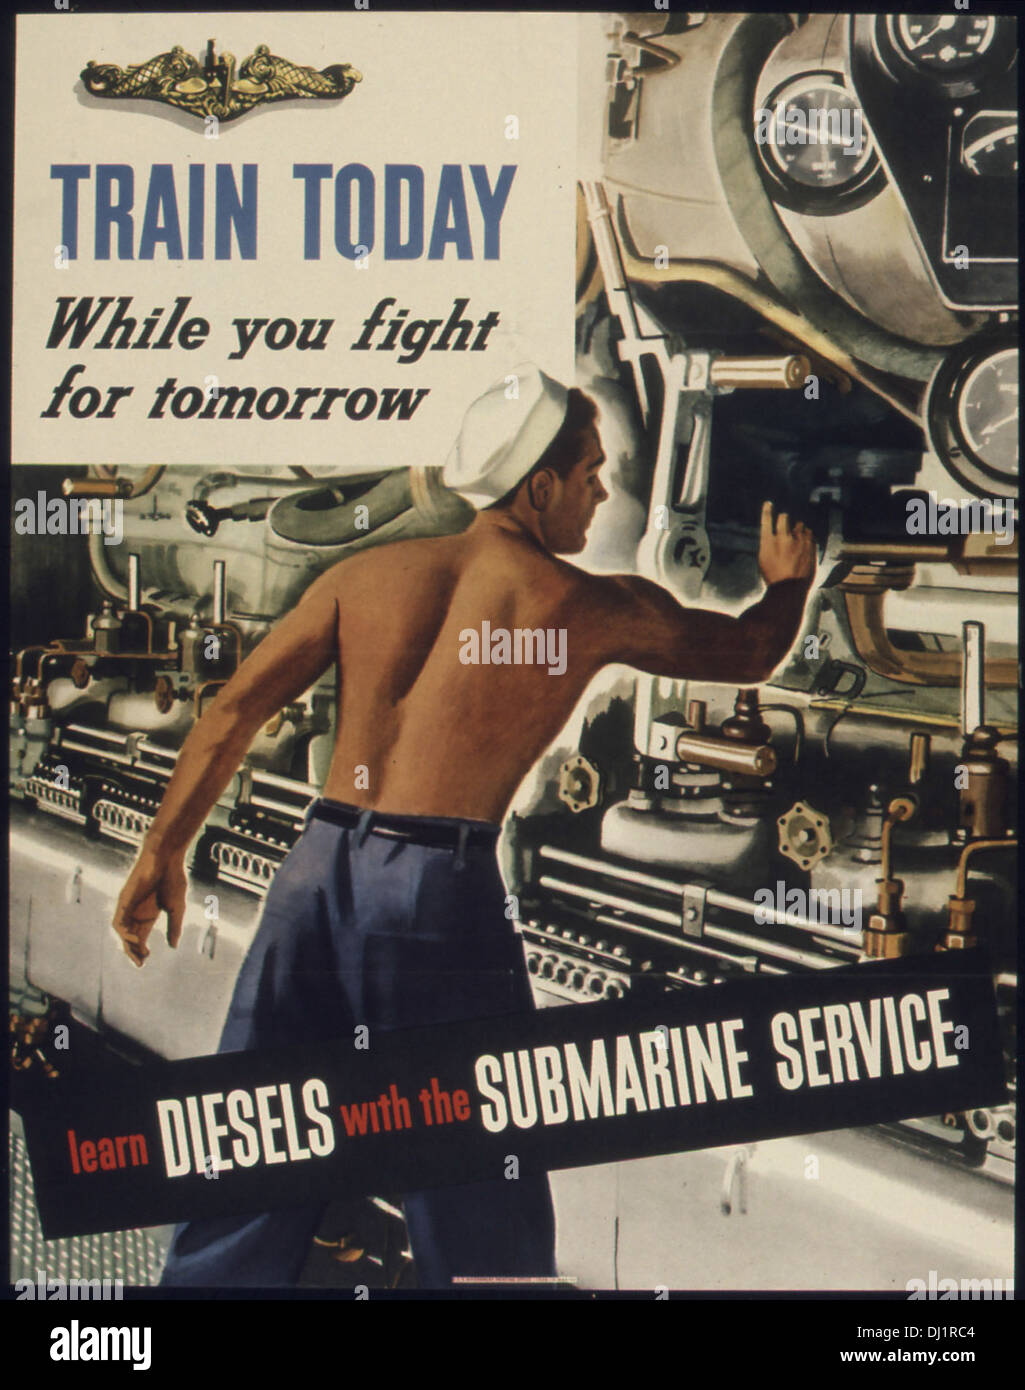 TRAIN TODAY WHILE YOU FIGHT FOR TOMORROW - LEARN DIESELS WITH THE SUBMARINE  SERVICE. 871 Stock Photo - Alamy